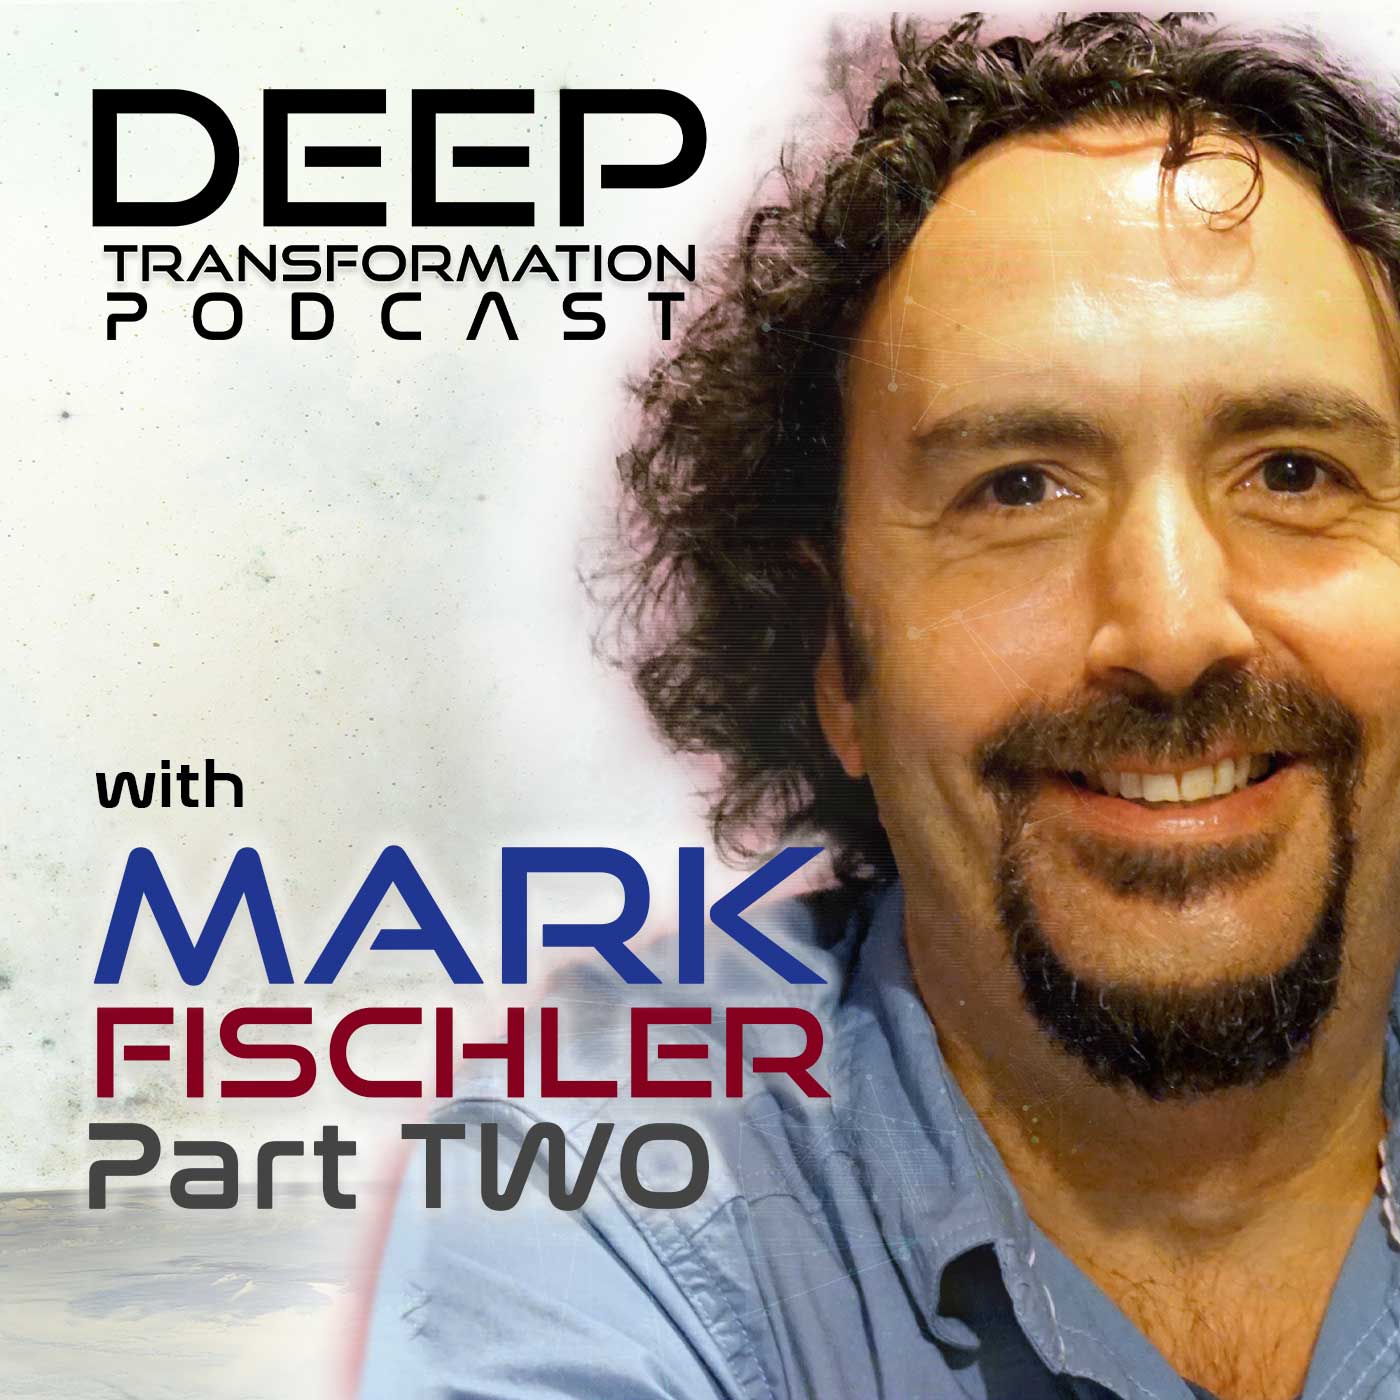 Mark Fischler (Part 2) – Building a Just World: How Our Laws Express Our Collective Values, and the Challenge of Uplifting Our Values, Law, and Society